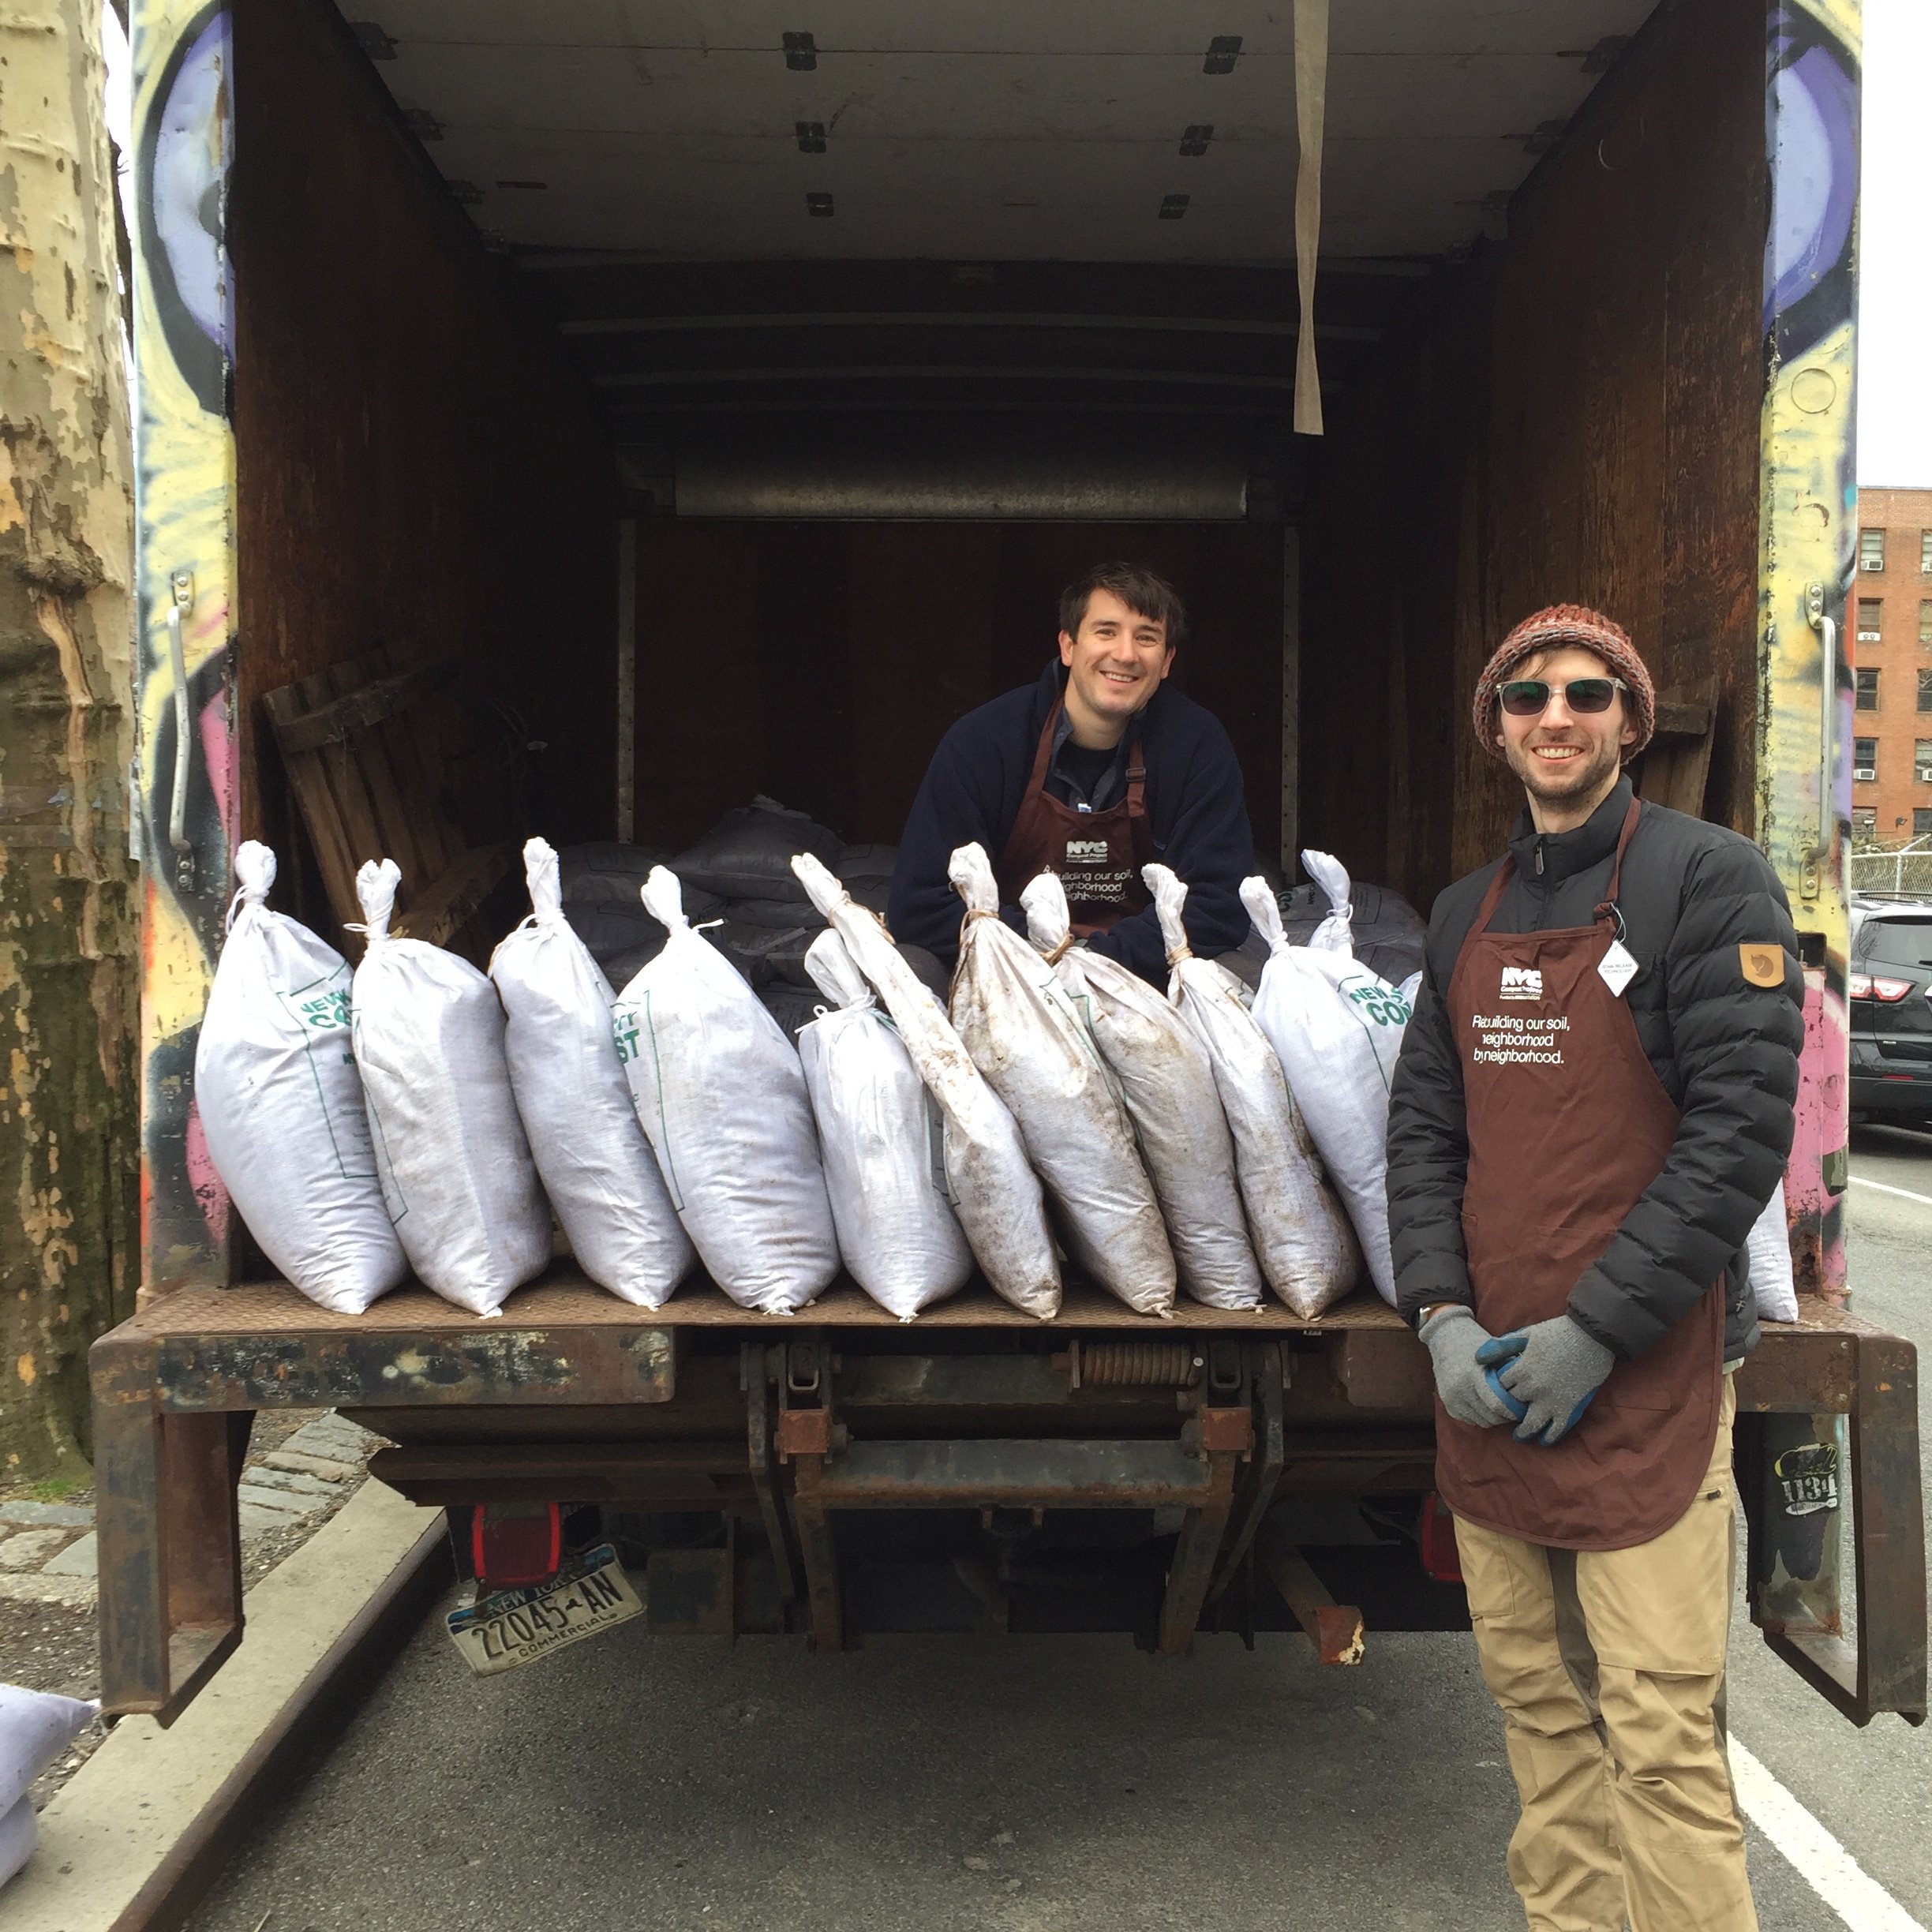 March 2019 - Compost giveaway with Lower East Side Ecology Center